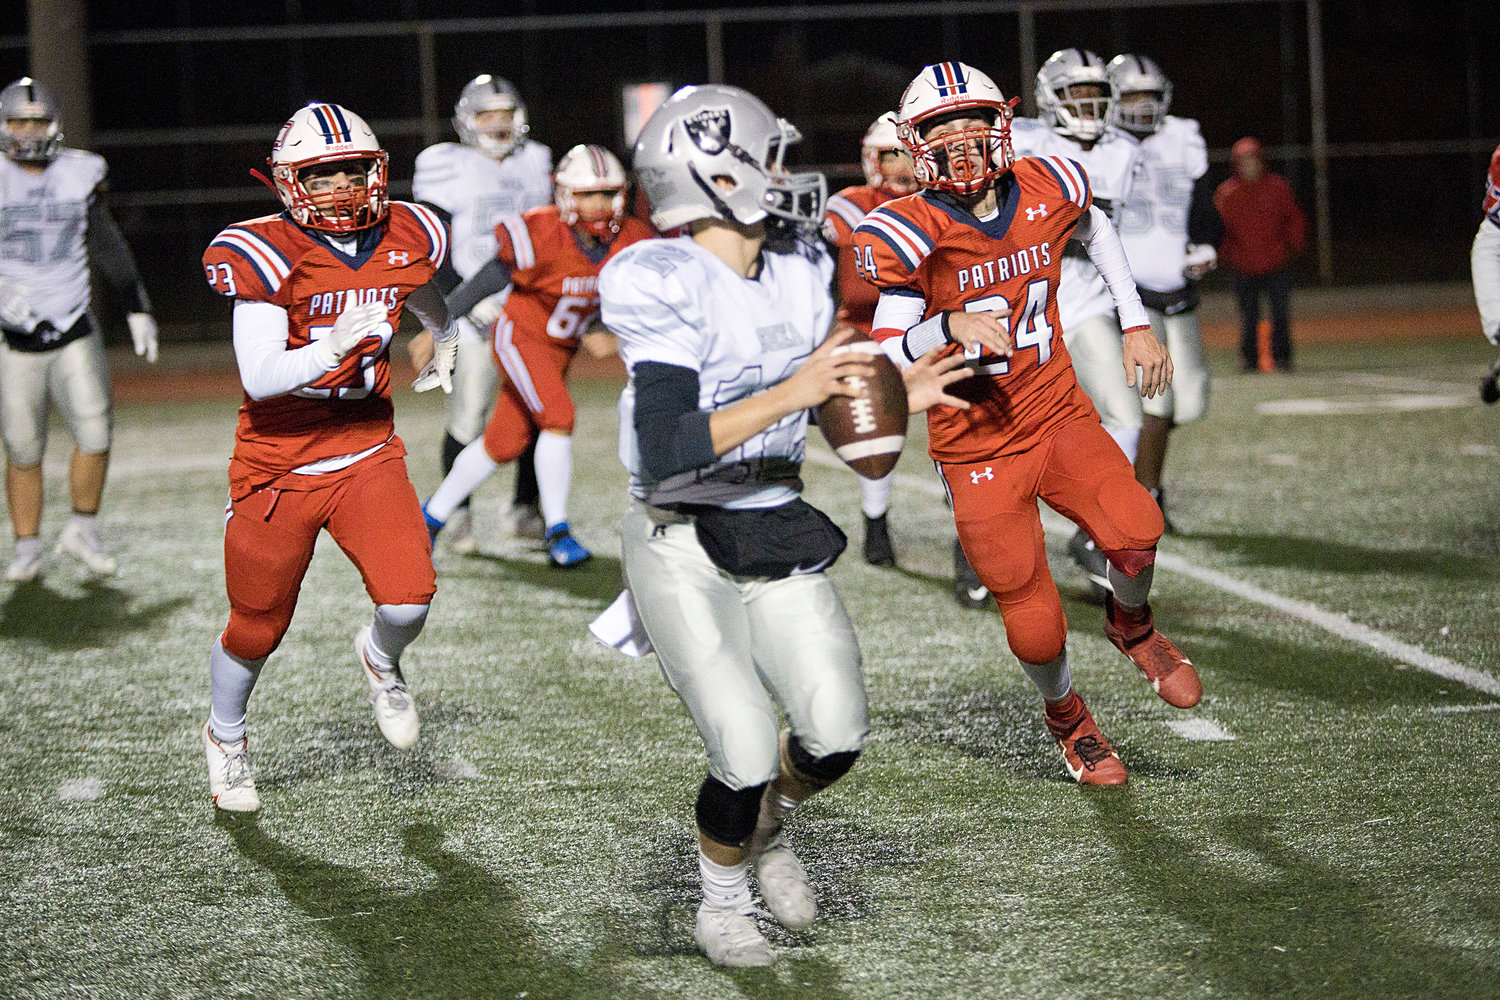 Portsmouth’s Sage Qaisar (left) and Dylan Brandariz close in on a Shea ball-carrier.